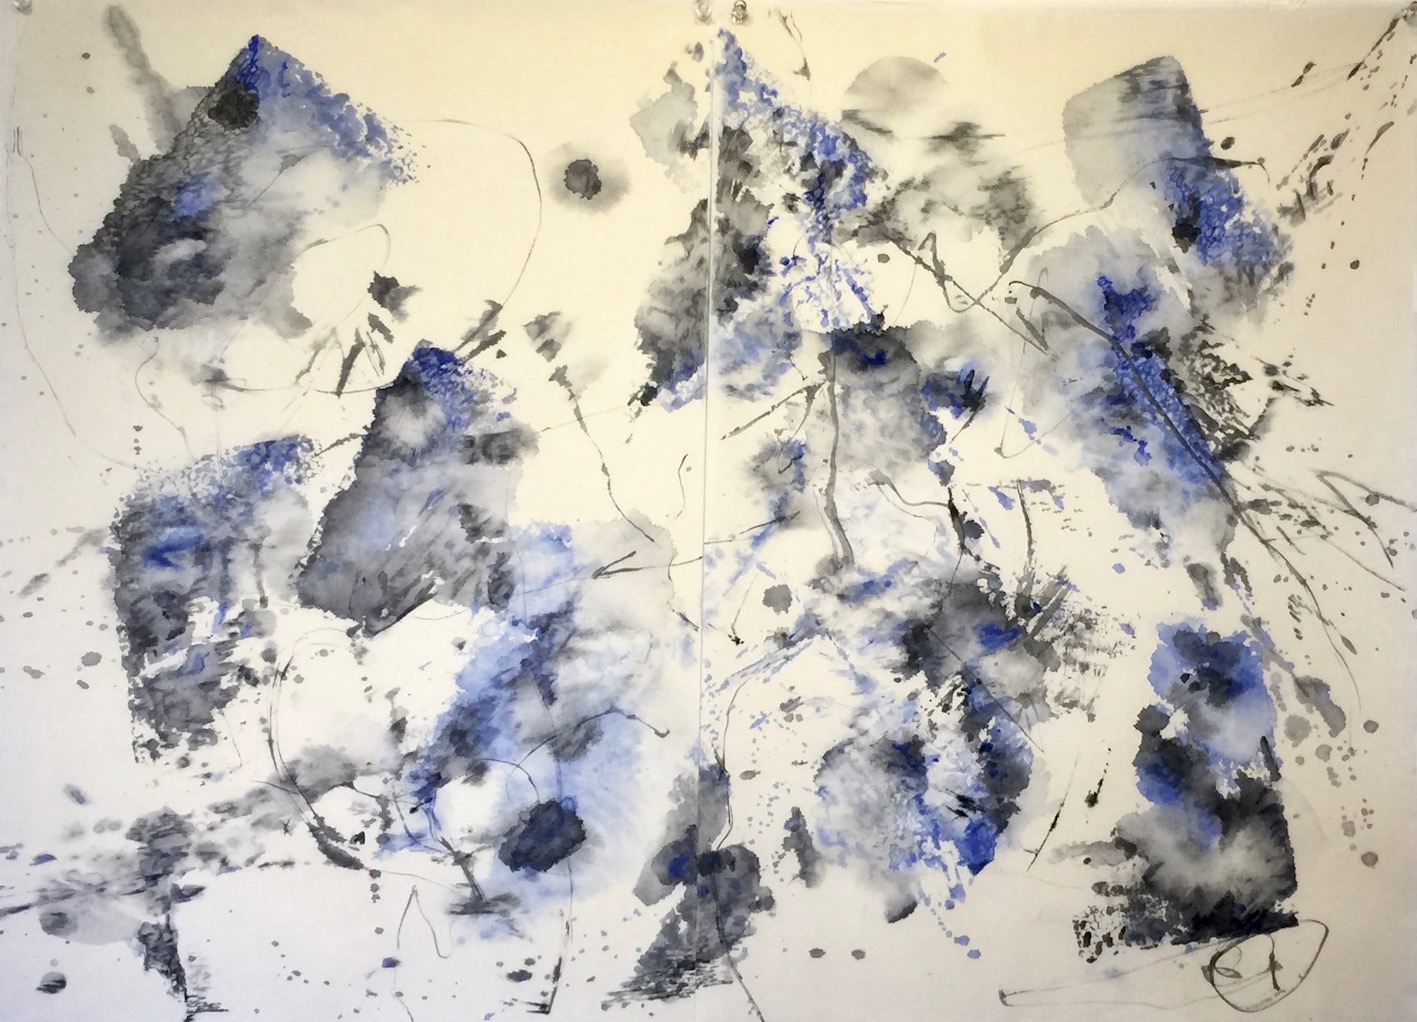 Shattered Water 破水 72 X 98 cm Sumi ink,water colour, acrylic 墨、水彩絵具、アクリル 2019 .